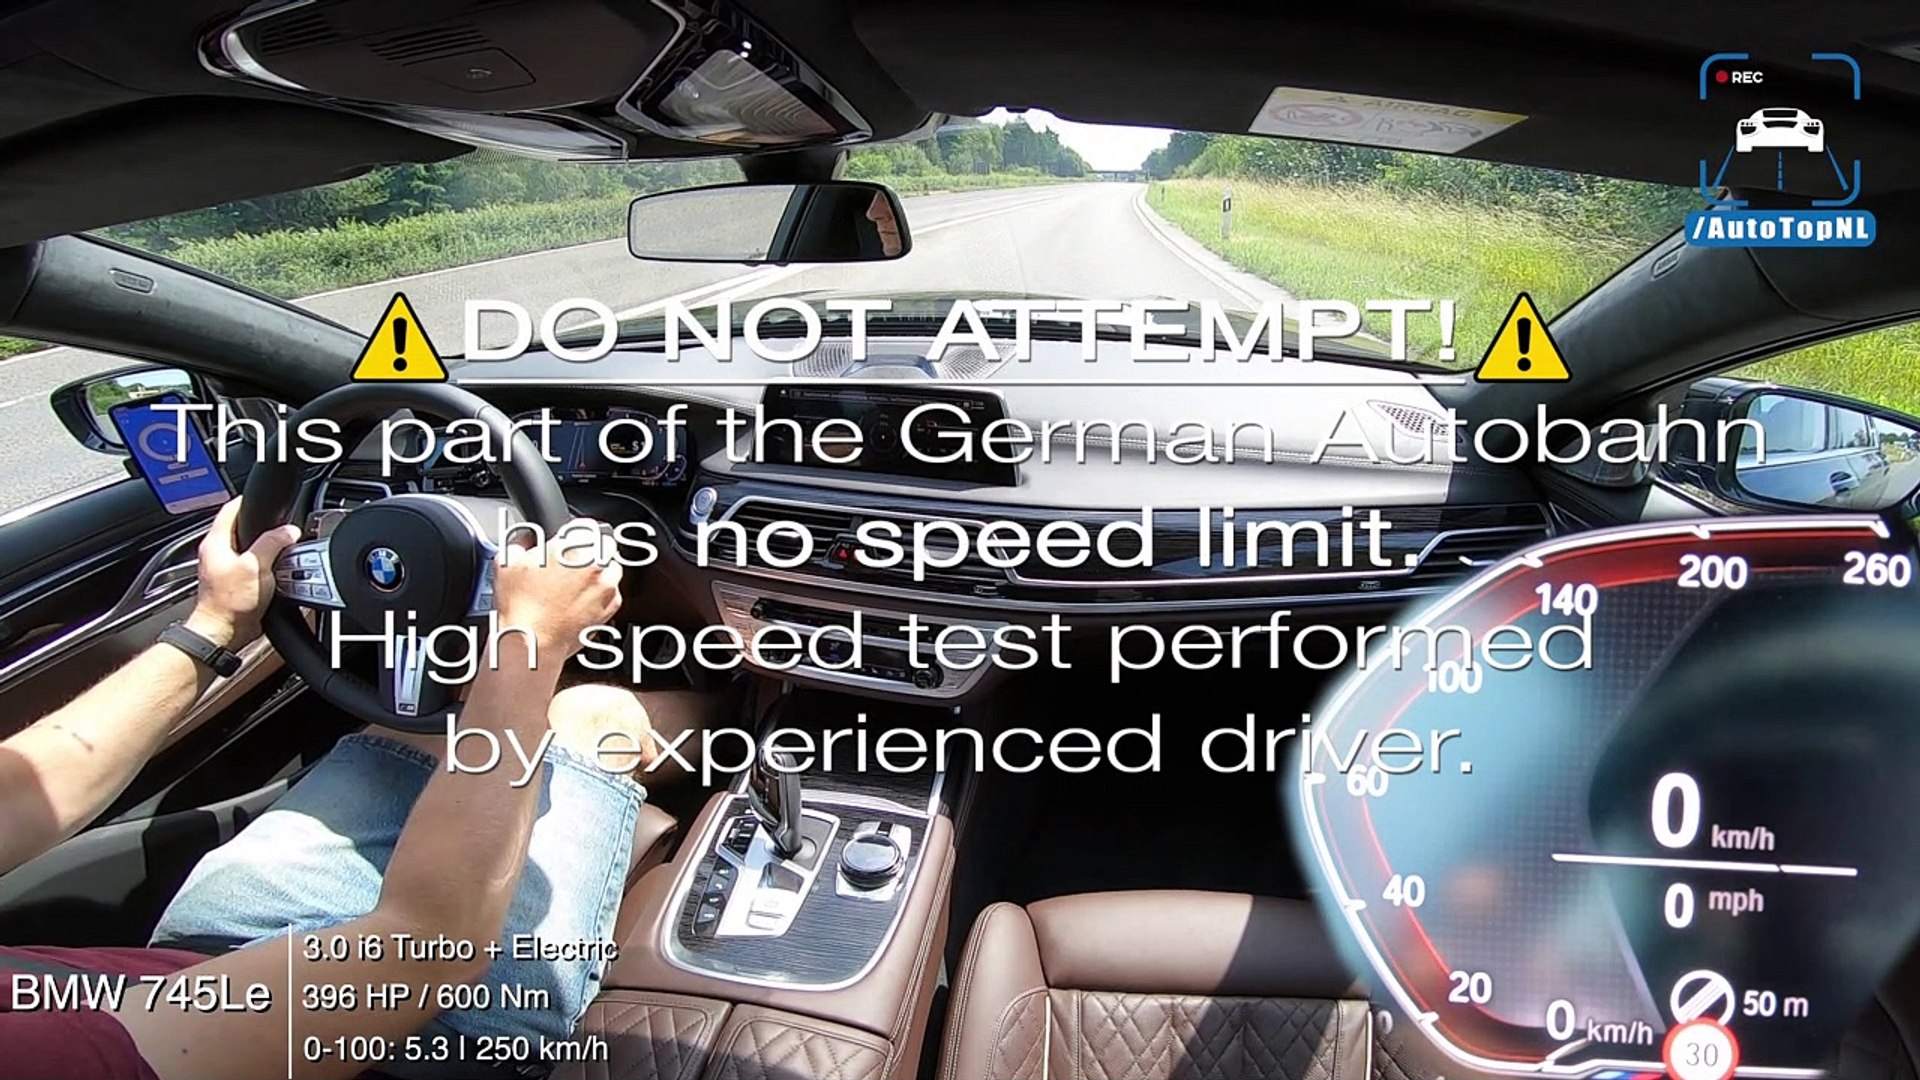 2020 BMW 7 Series 745Le TOP SPEED on AUTOBAHN by AutoTopNL